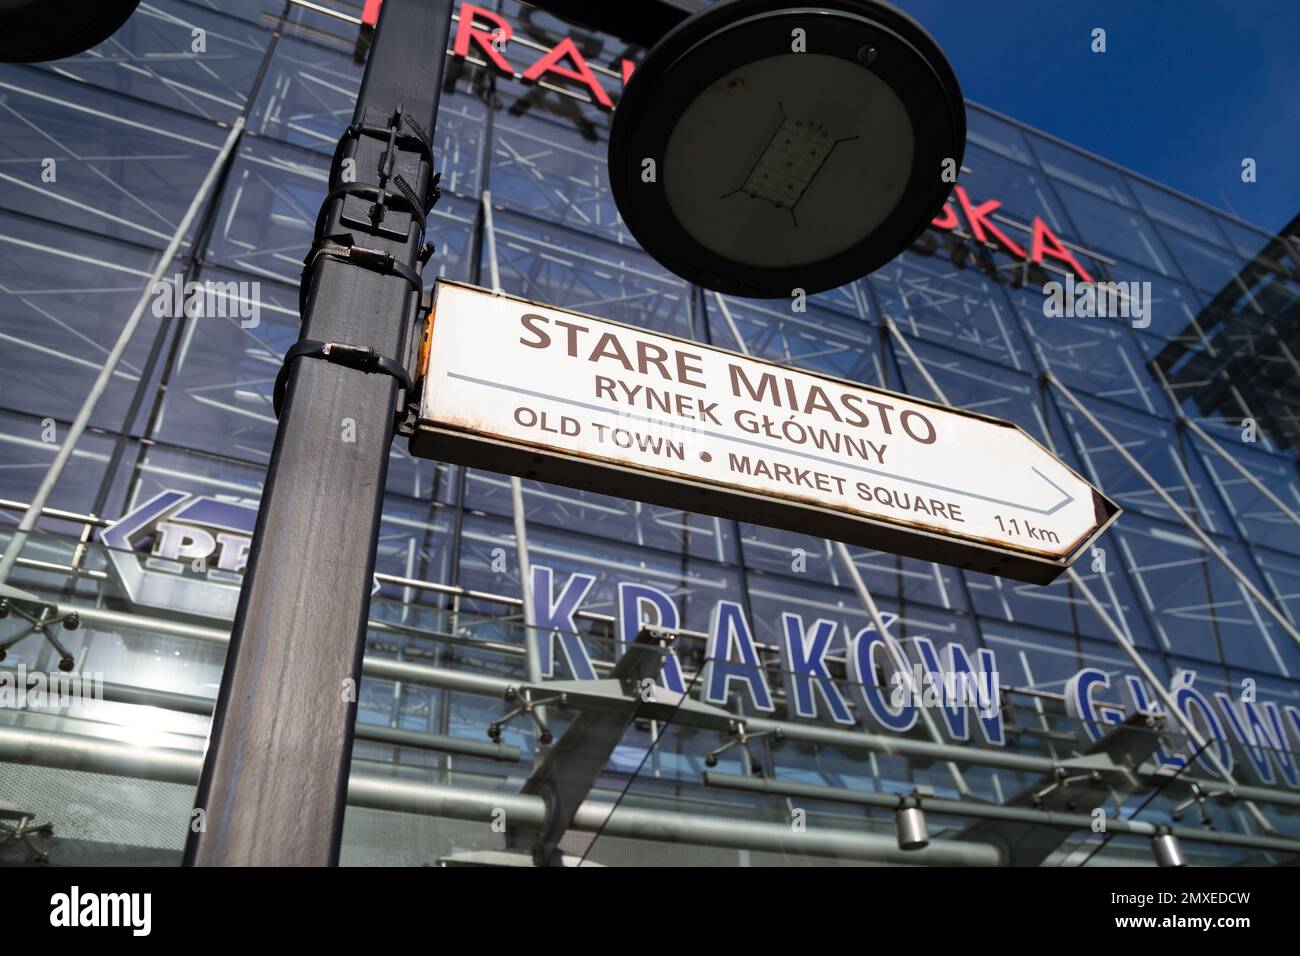 Arrow sign directing to Old Town Kraków and Market Square, in front of Galeria Krakowska shopping mall entrance. Main Railway Station, Krakow, Poland. Stock Photo